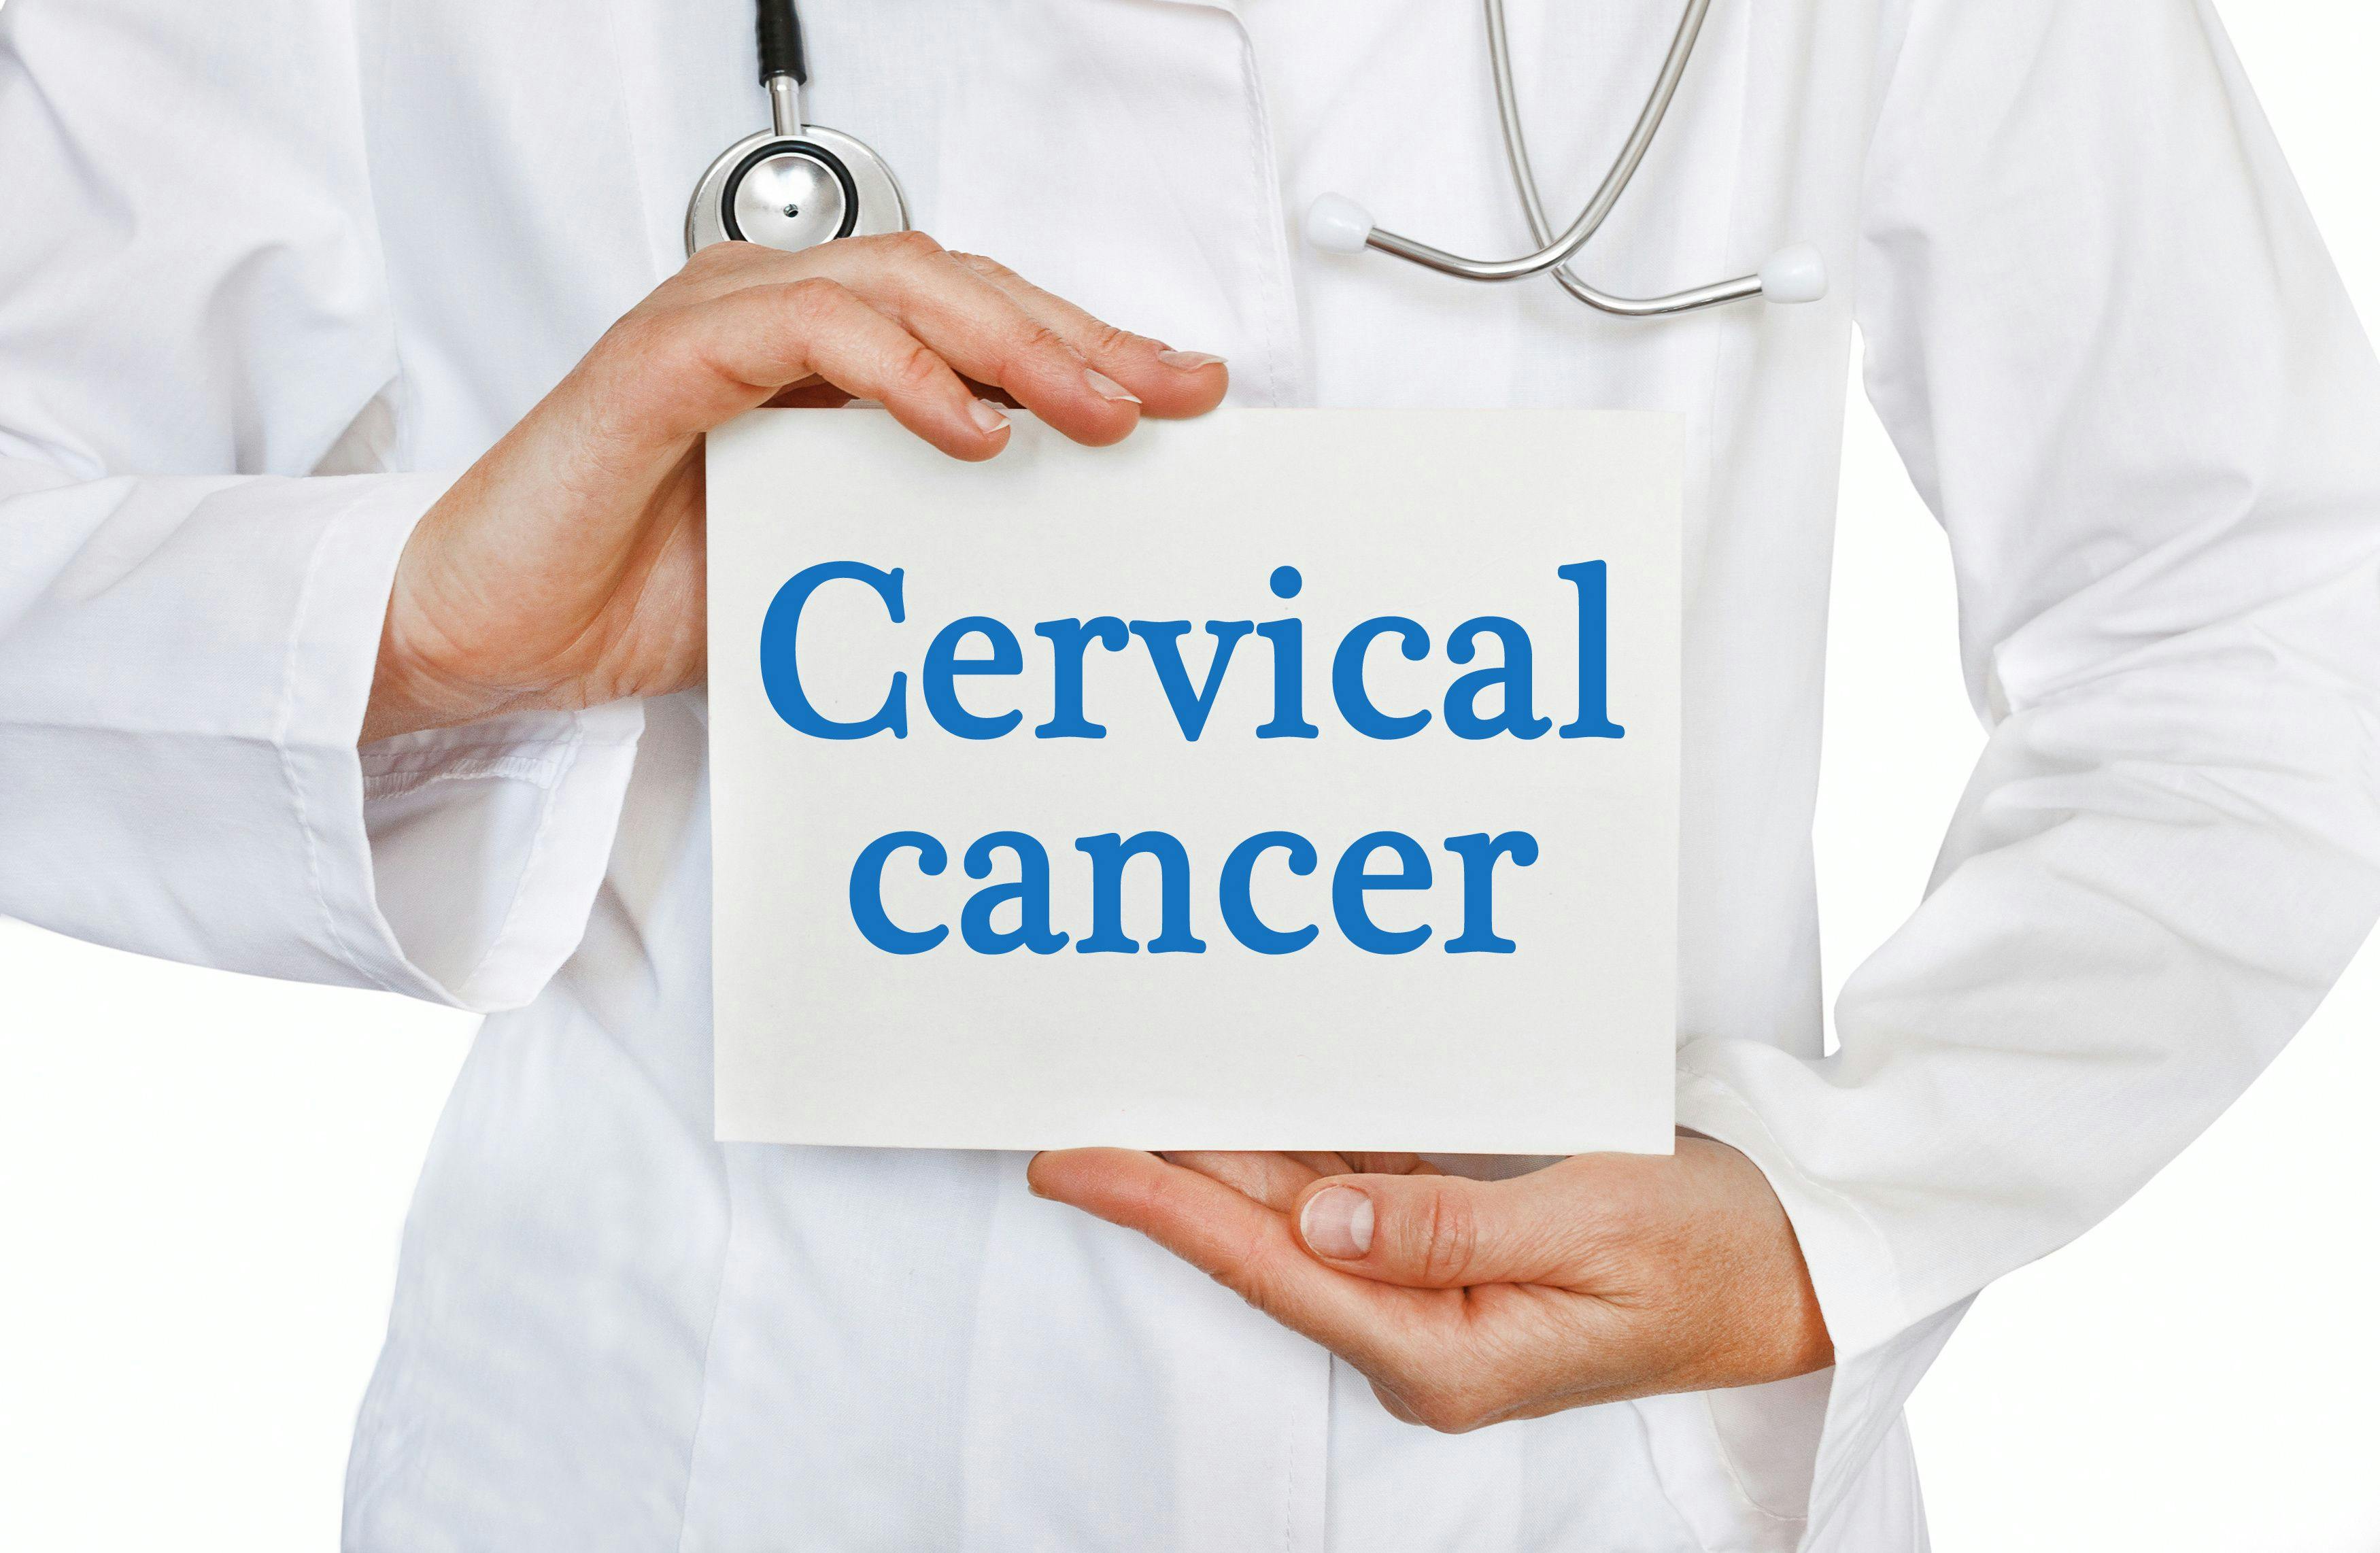 doctor holding clipboard that says, "cervical cancer" 